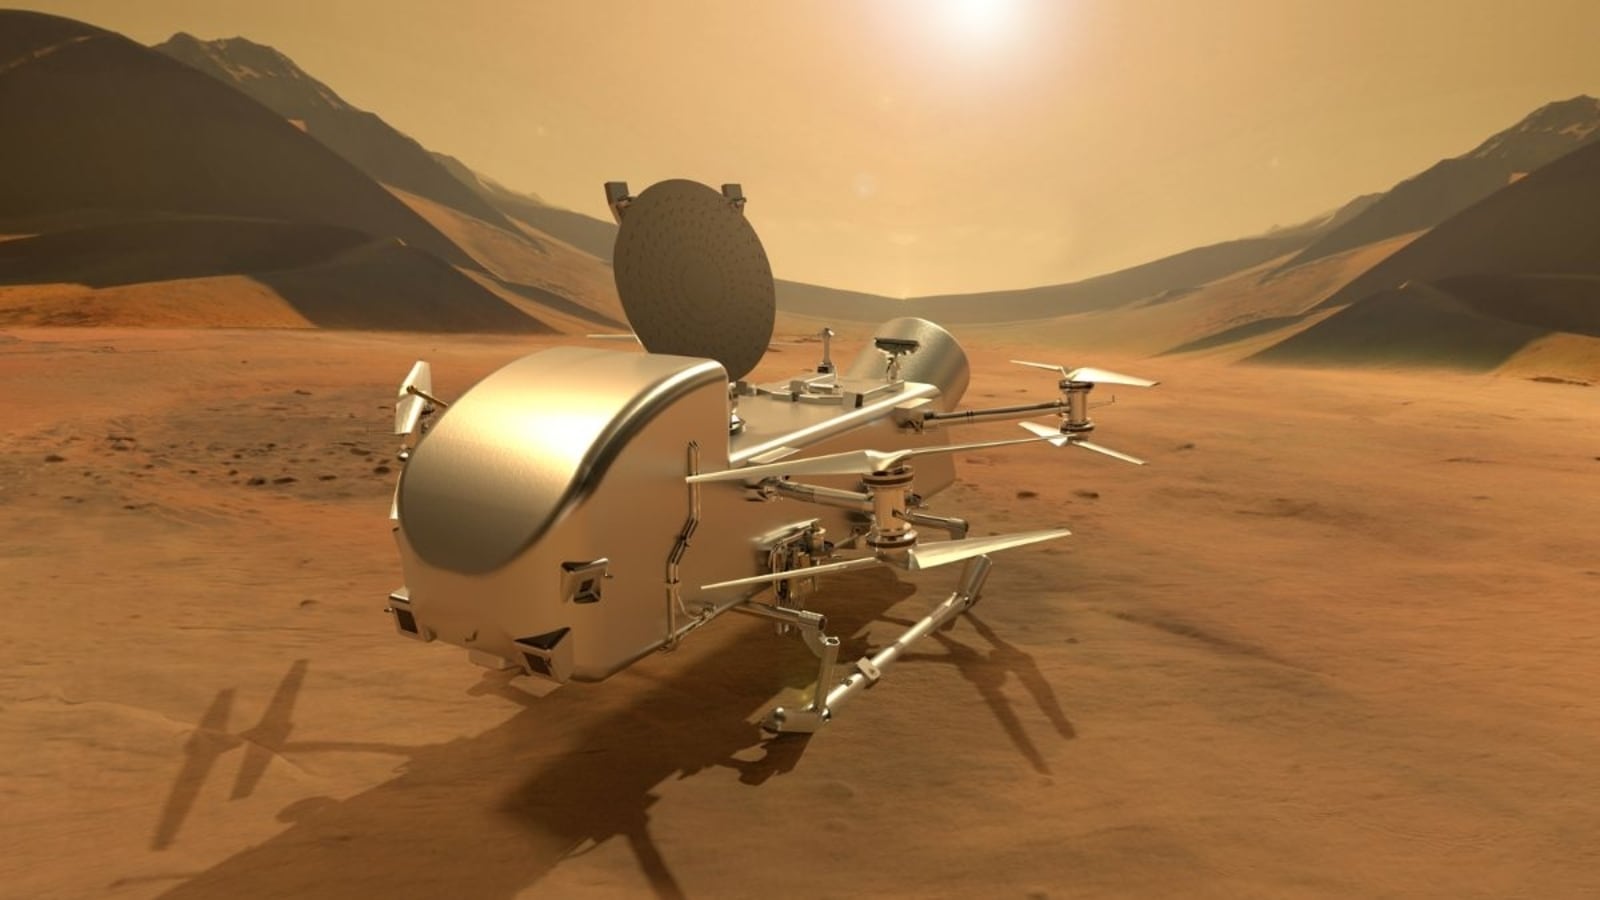 NASA preparing nuclear-powered drone for mission to Saturn’s moon Titan